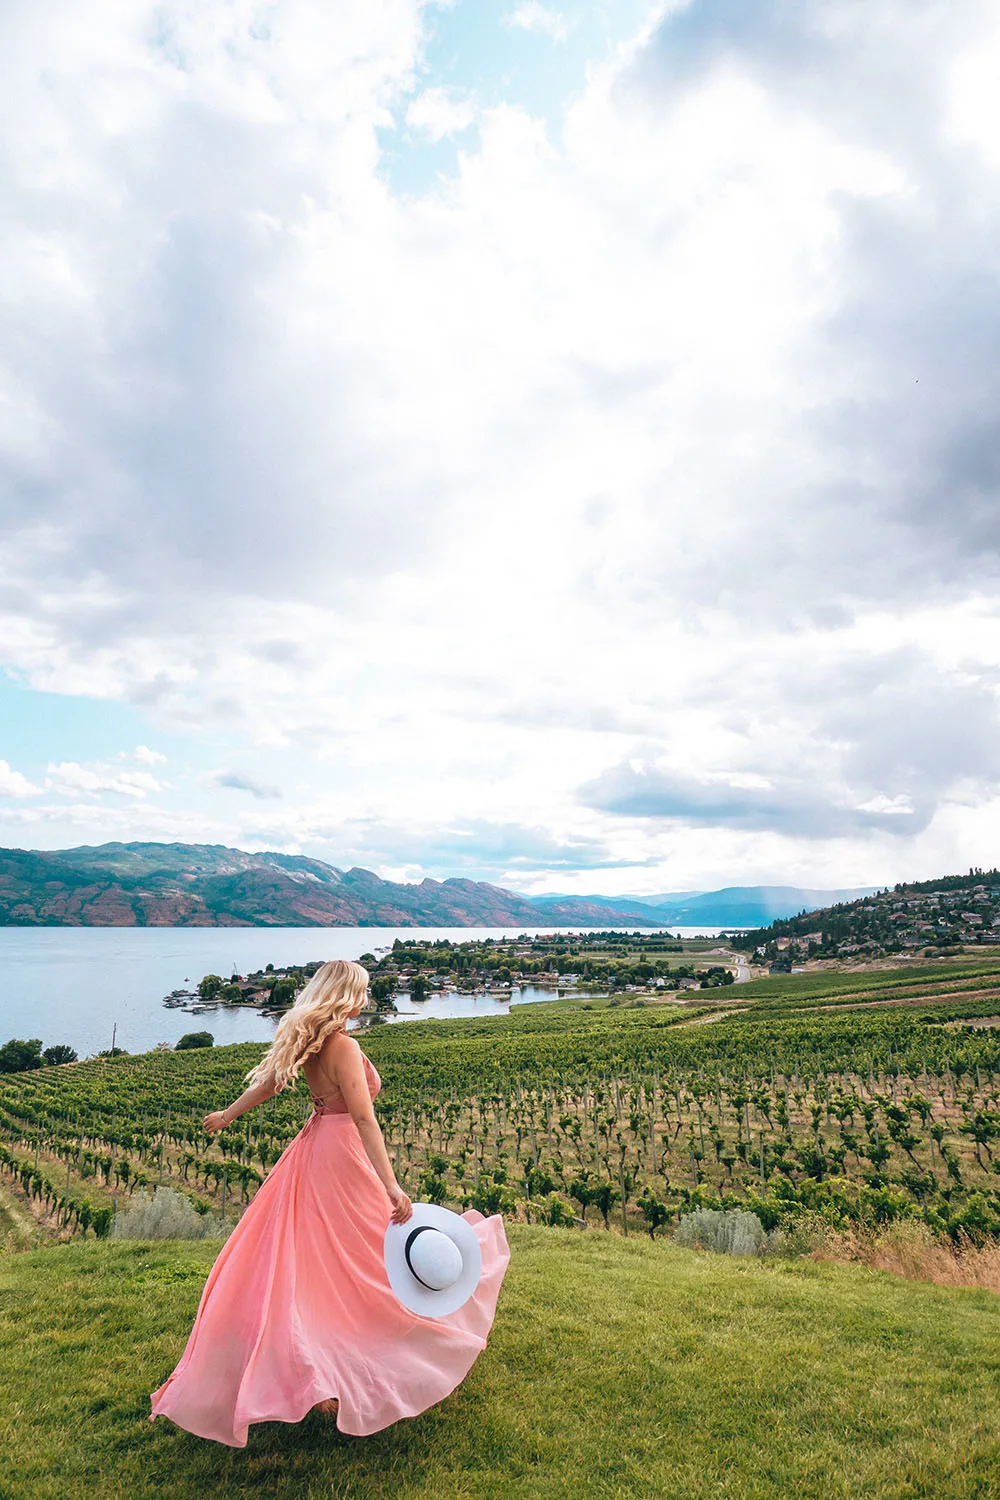 If you're heading to the Okanagan soon and planning on spending time in Kelowna, you don't want to miss this guide to the best wineries in Kelowna! From organic wineries to wineries with the best view, this guide will help you plan your visit to Kelowna’s incredible wine region. Pictured here: Quails Gate Estate Winery